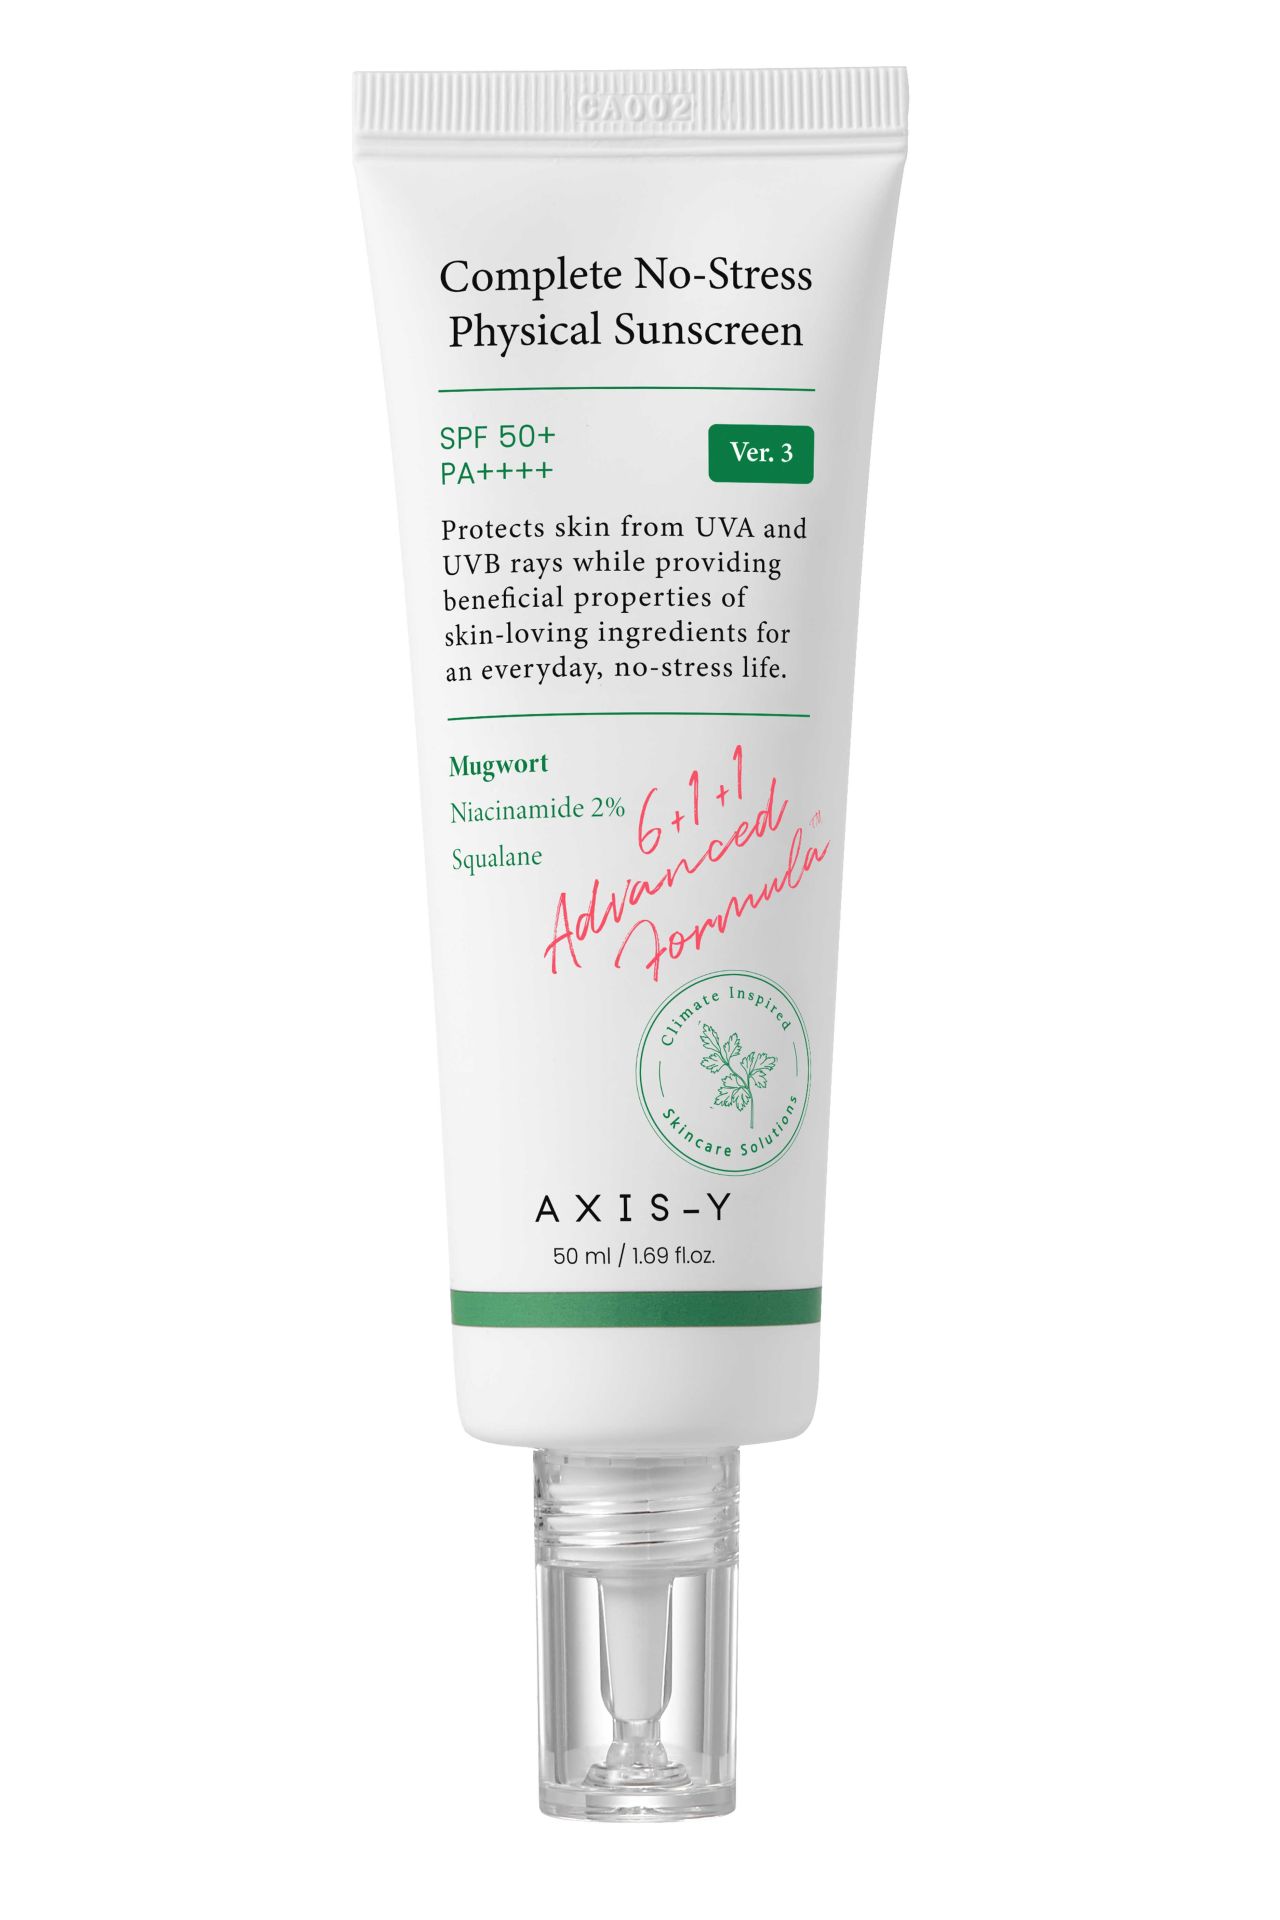 AXIS-Y Complete No-Stress Physical Sunscreen (V3) 50 ml